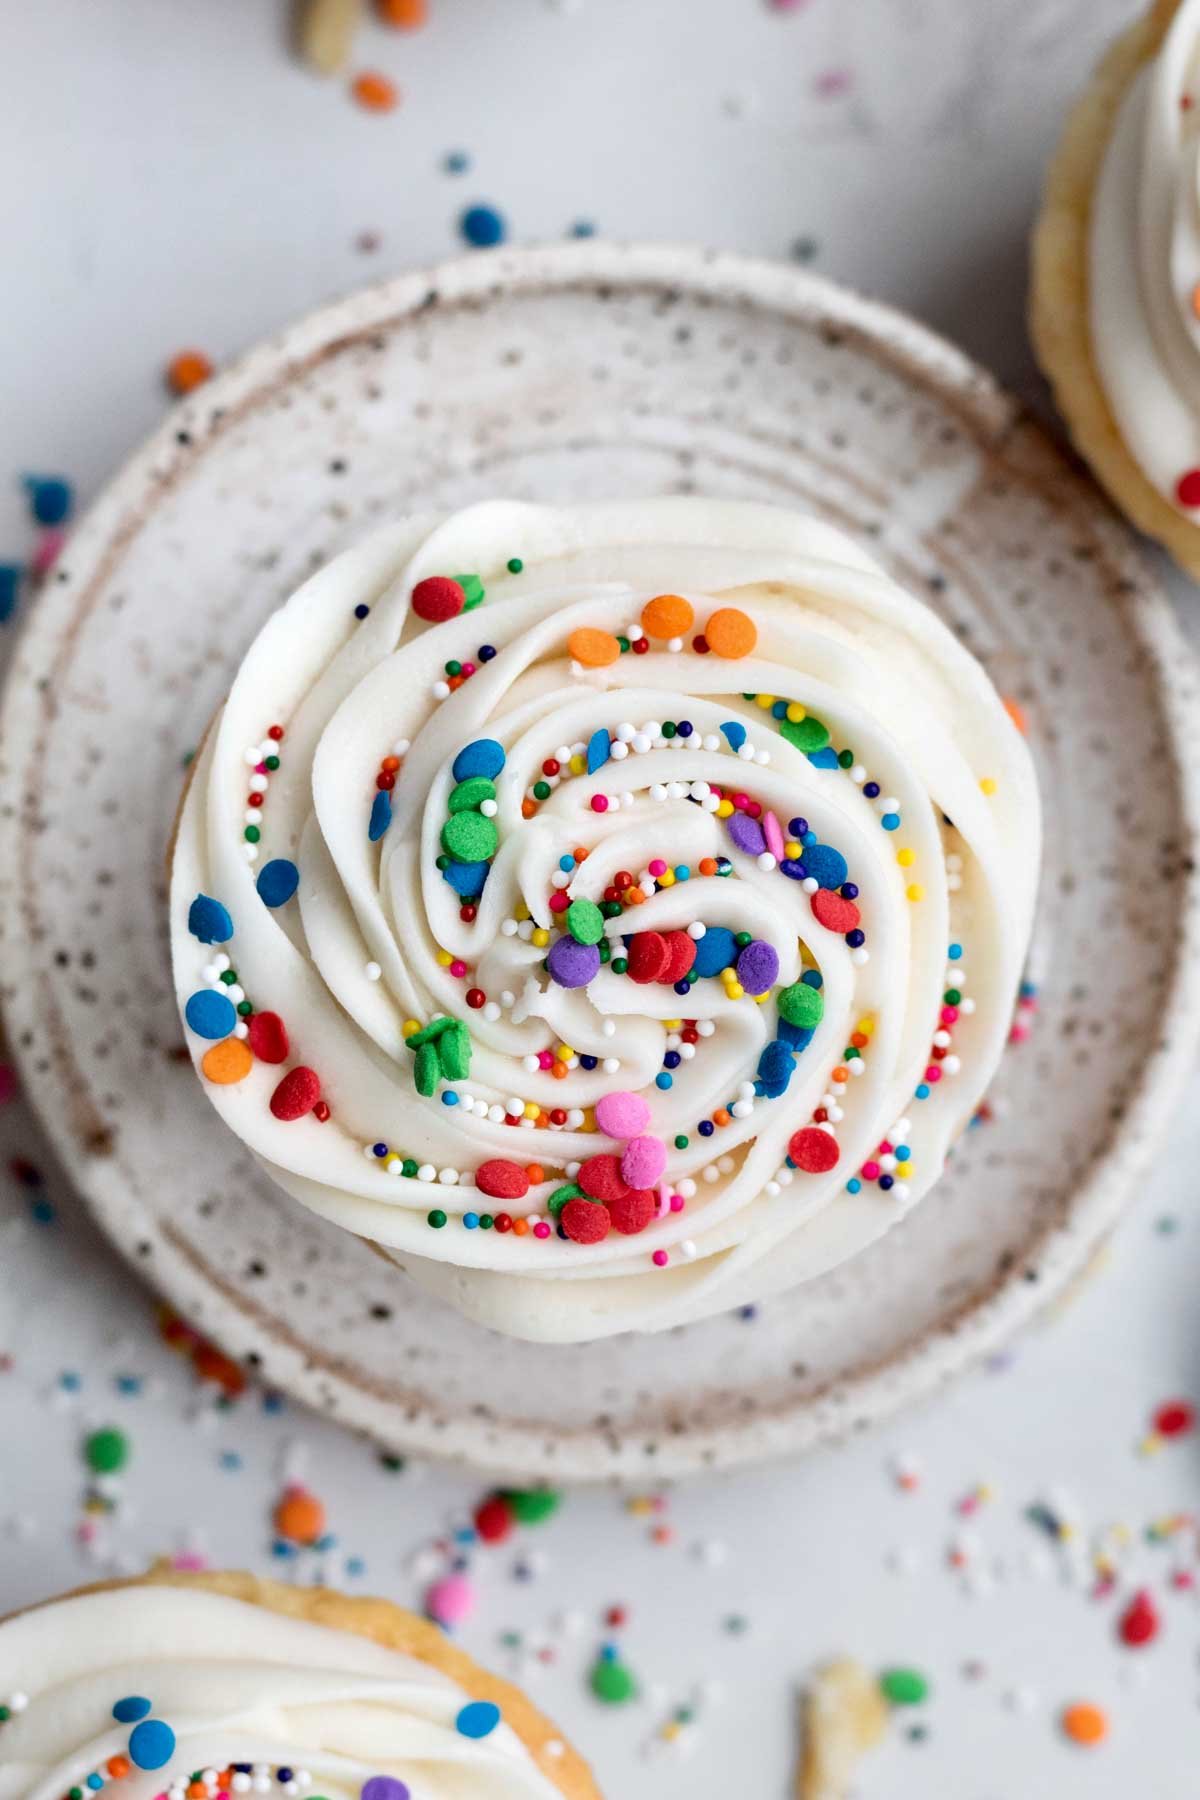 Swirl of the cupcake is a perfectly piped peak of creamy, vanilla frosting with rainbow sprinkles.